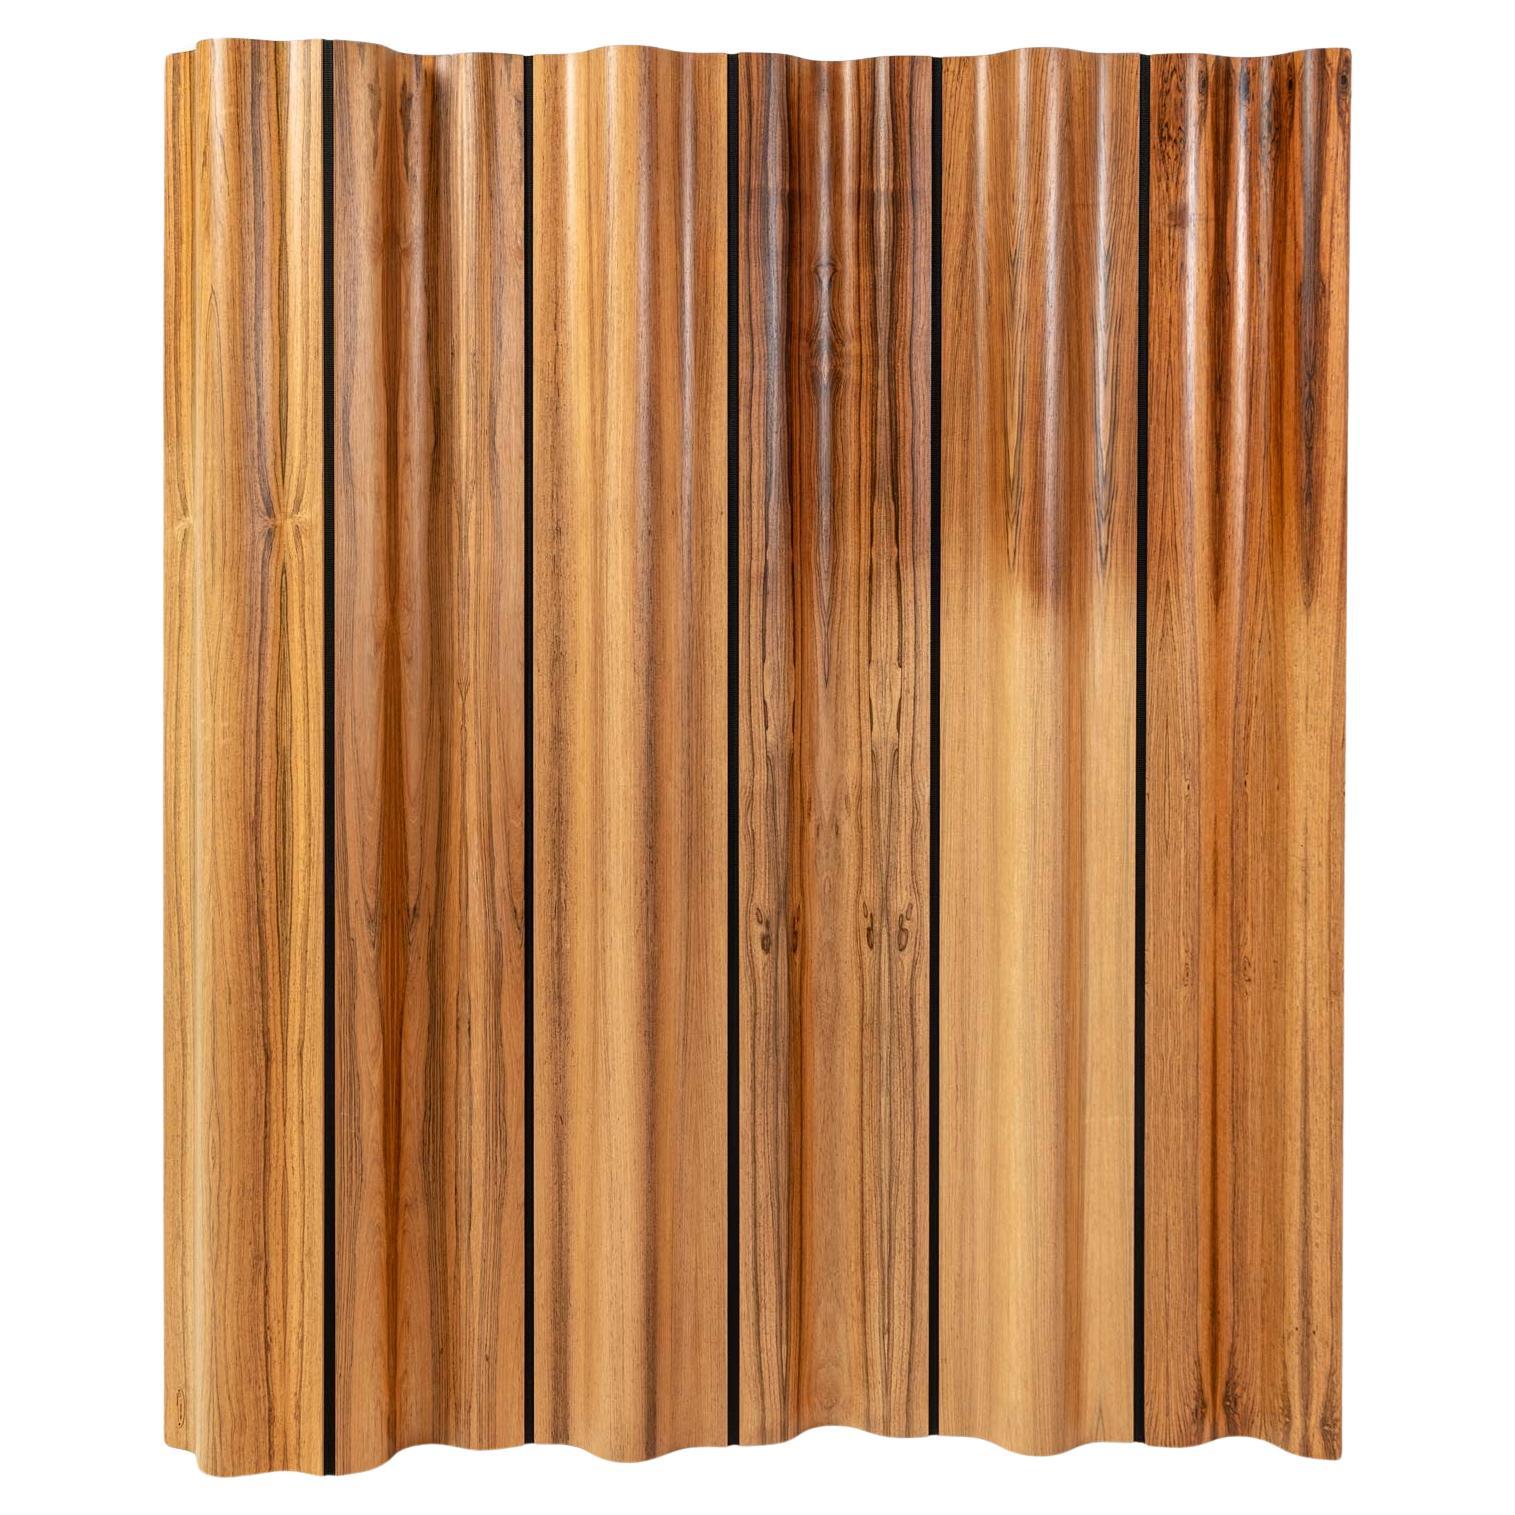 Eames Rosewood Screen/Room Divider FSW-6 1996 edition